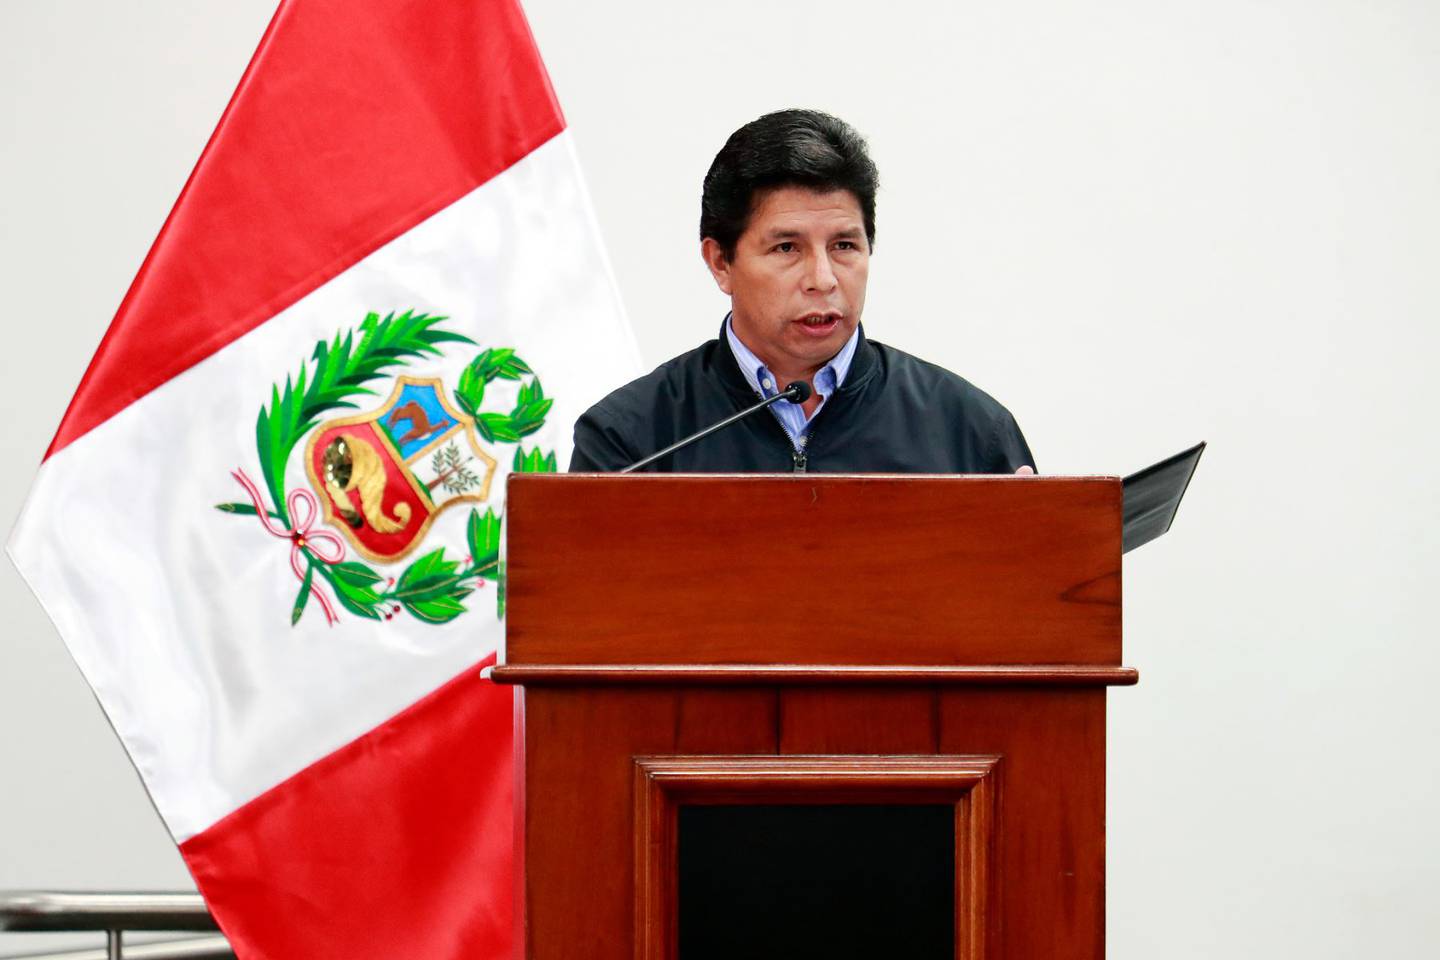 President Pedro Castillo was to face an impeachment process on December 7.